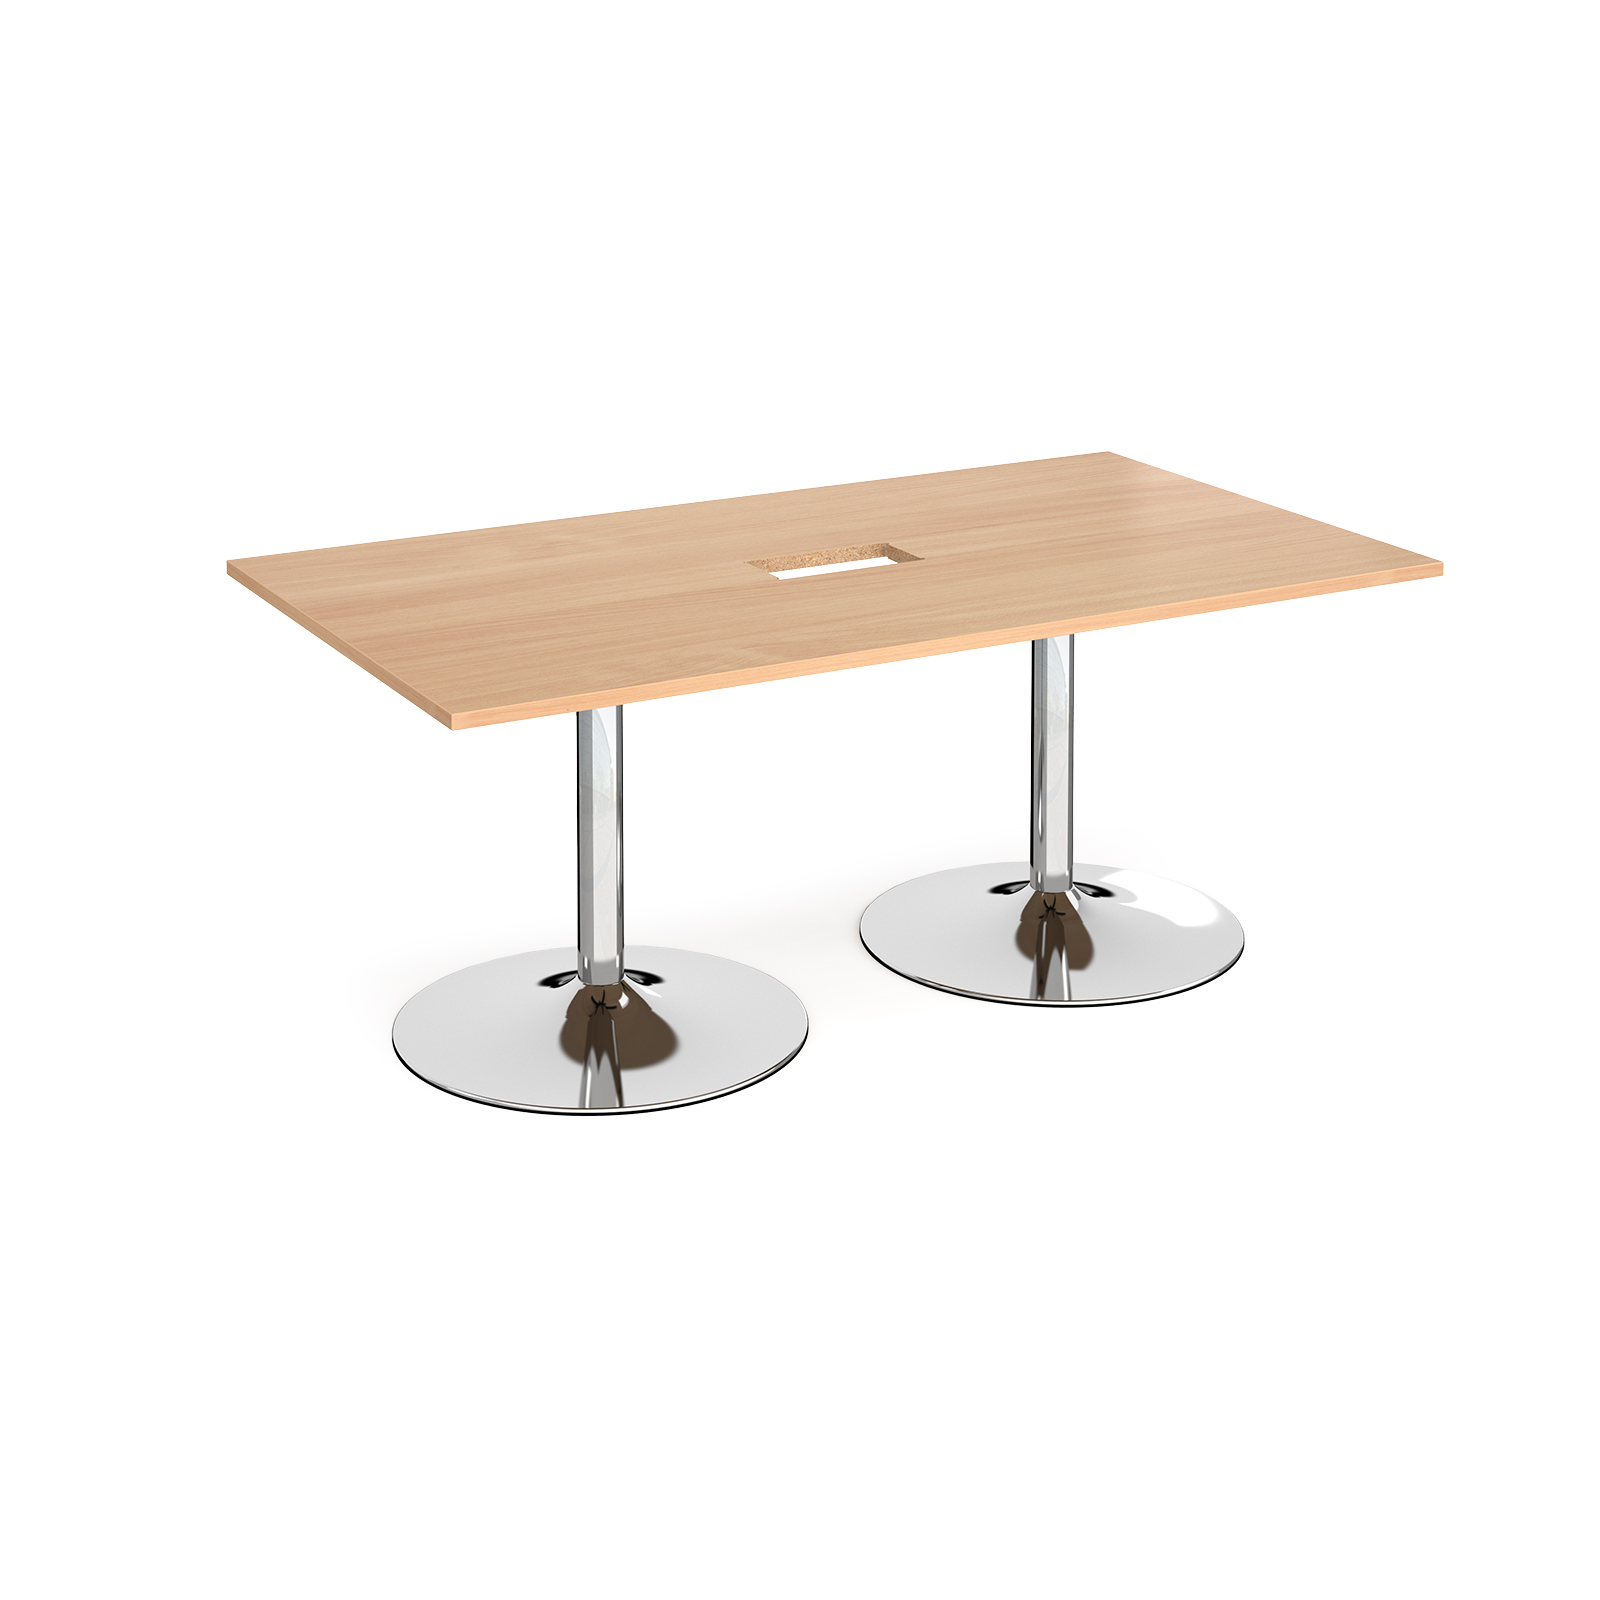 Trumpet base rectangular boardroom table 1800mm x 1000mm with central cutout 272mm x 132mm - chrome base, beech top